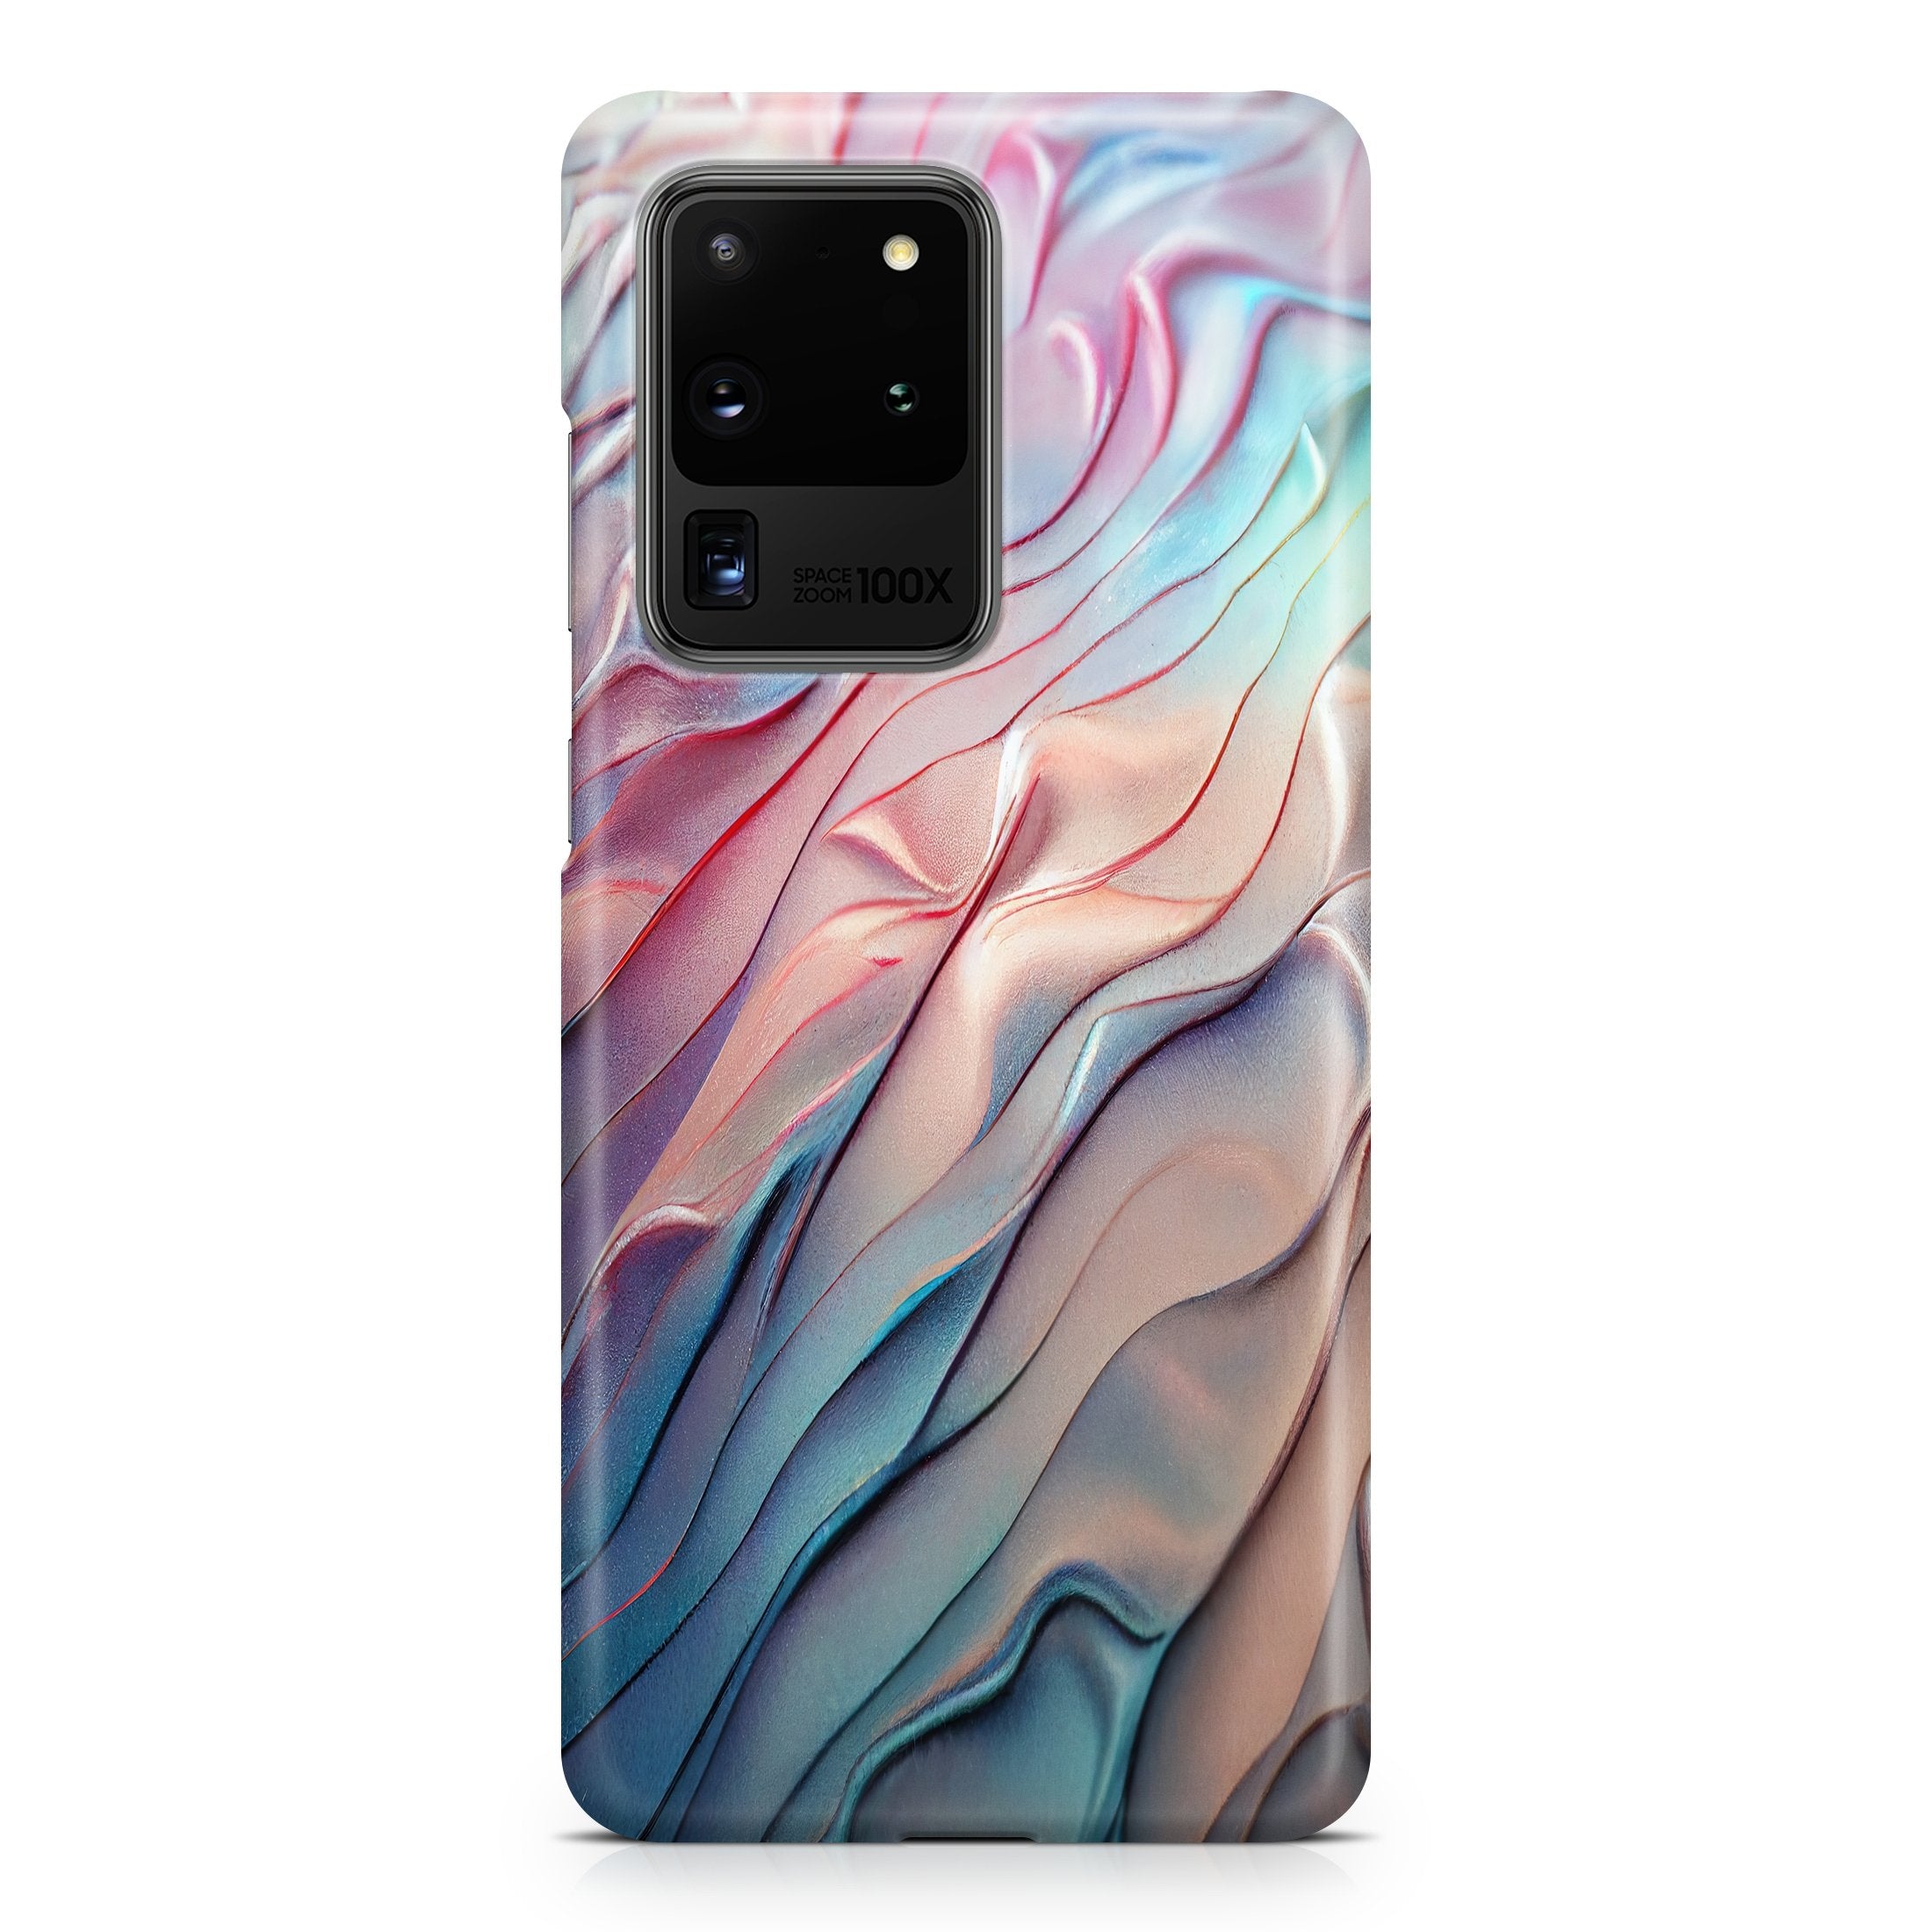 Tropical Ripples - Samsung phone case designs by CaseSwagger